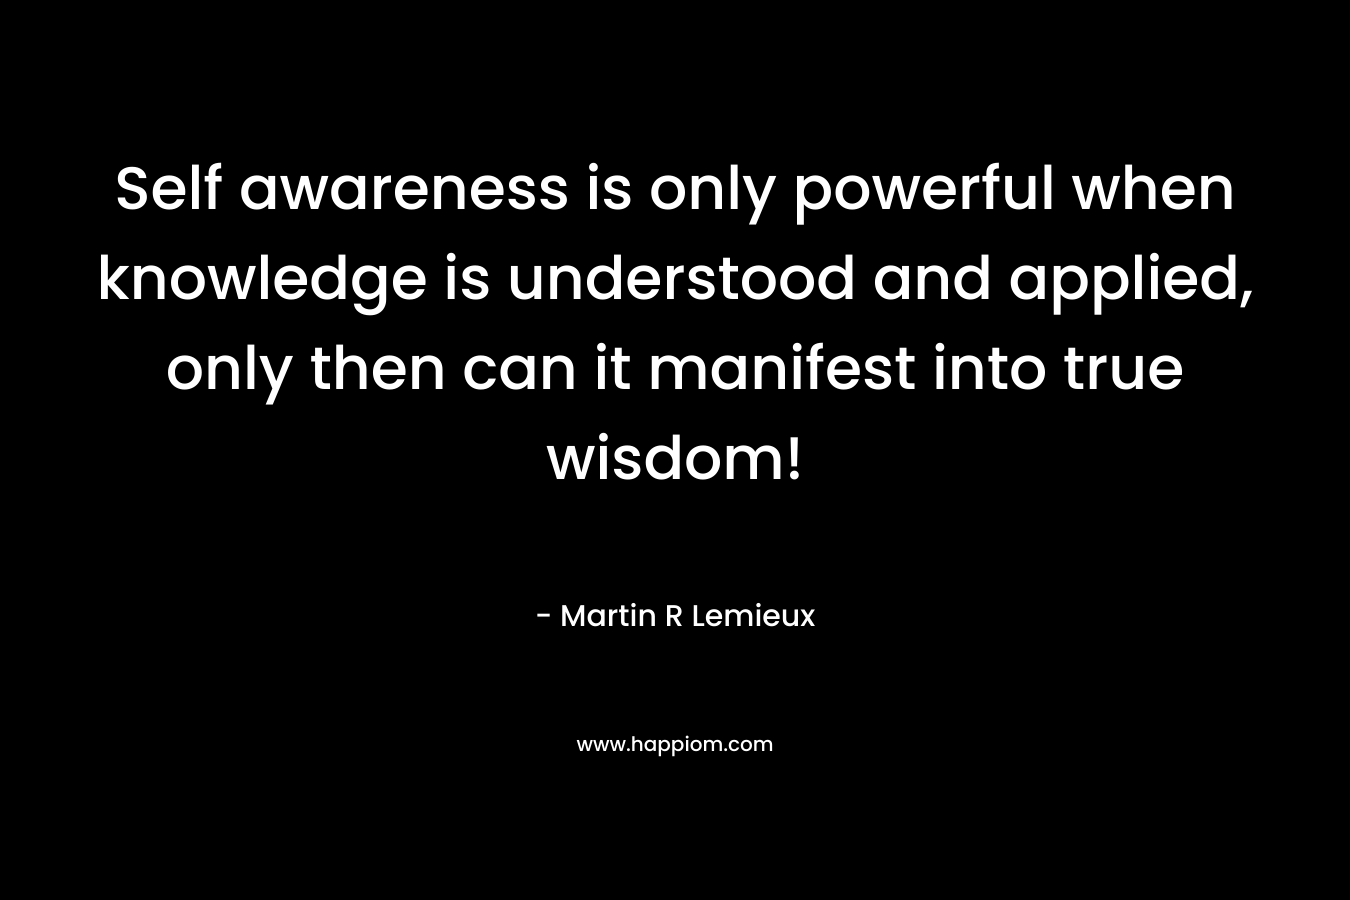 Self awareness is only powerful when knowledge is understood and applied, only then can it manifest into true wisdom!